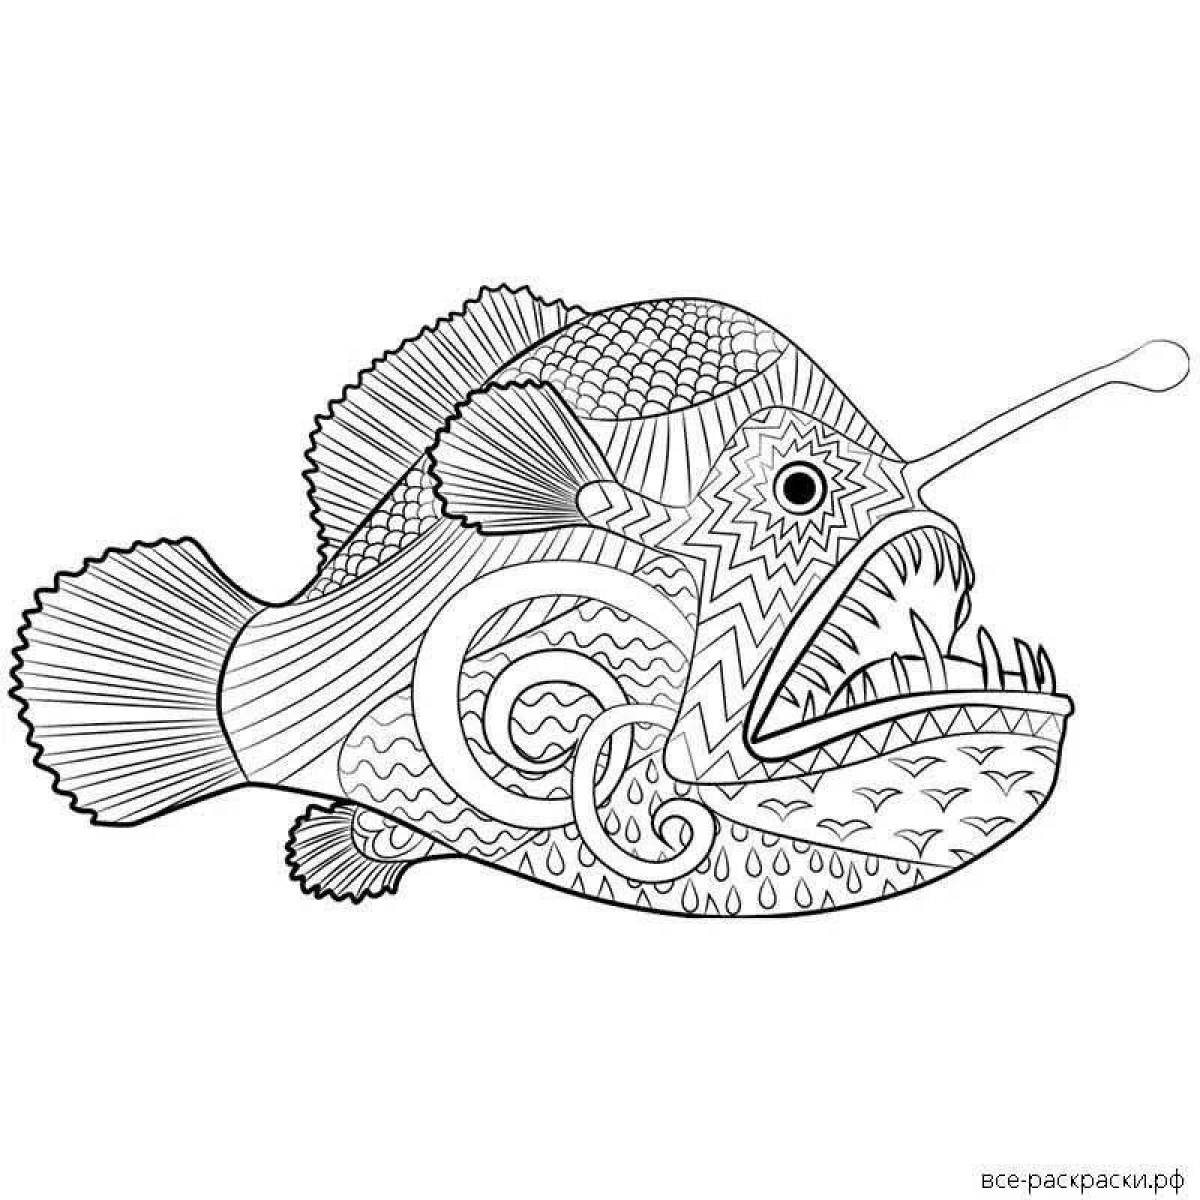 Radiant angler coloring page